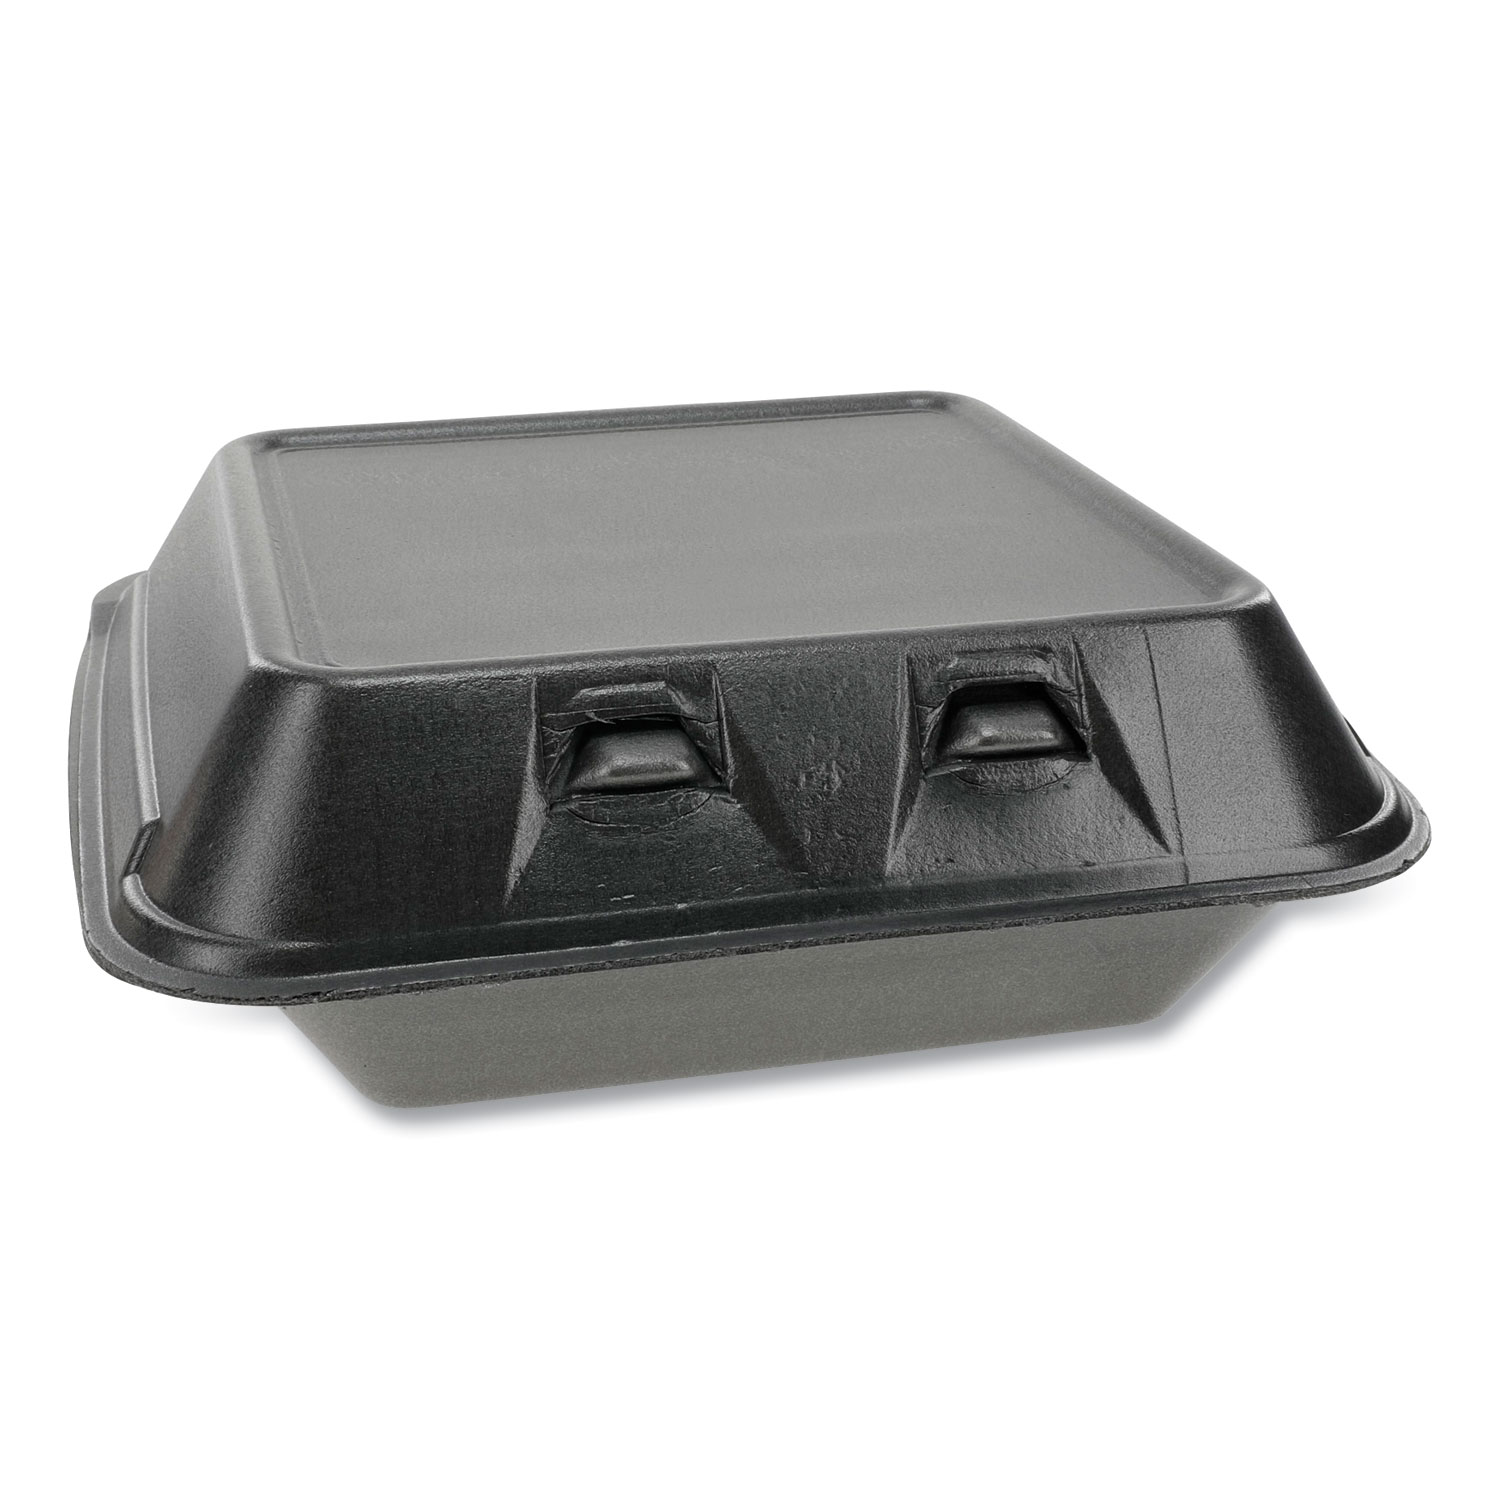  Pactiv YHLB08010000 SmartLock Foam Hinged Containers, Medium, 8 x 8.5 x 3, 1-Compartment, Black, 150/Carton (PCTYHLB08010000) 